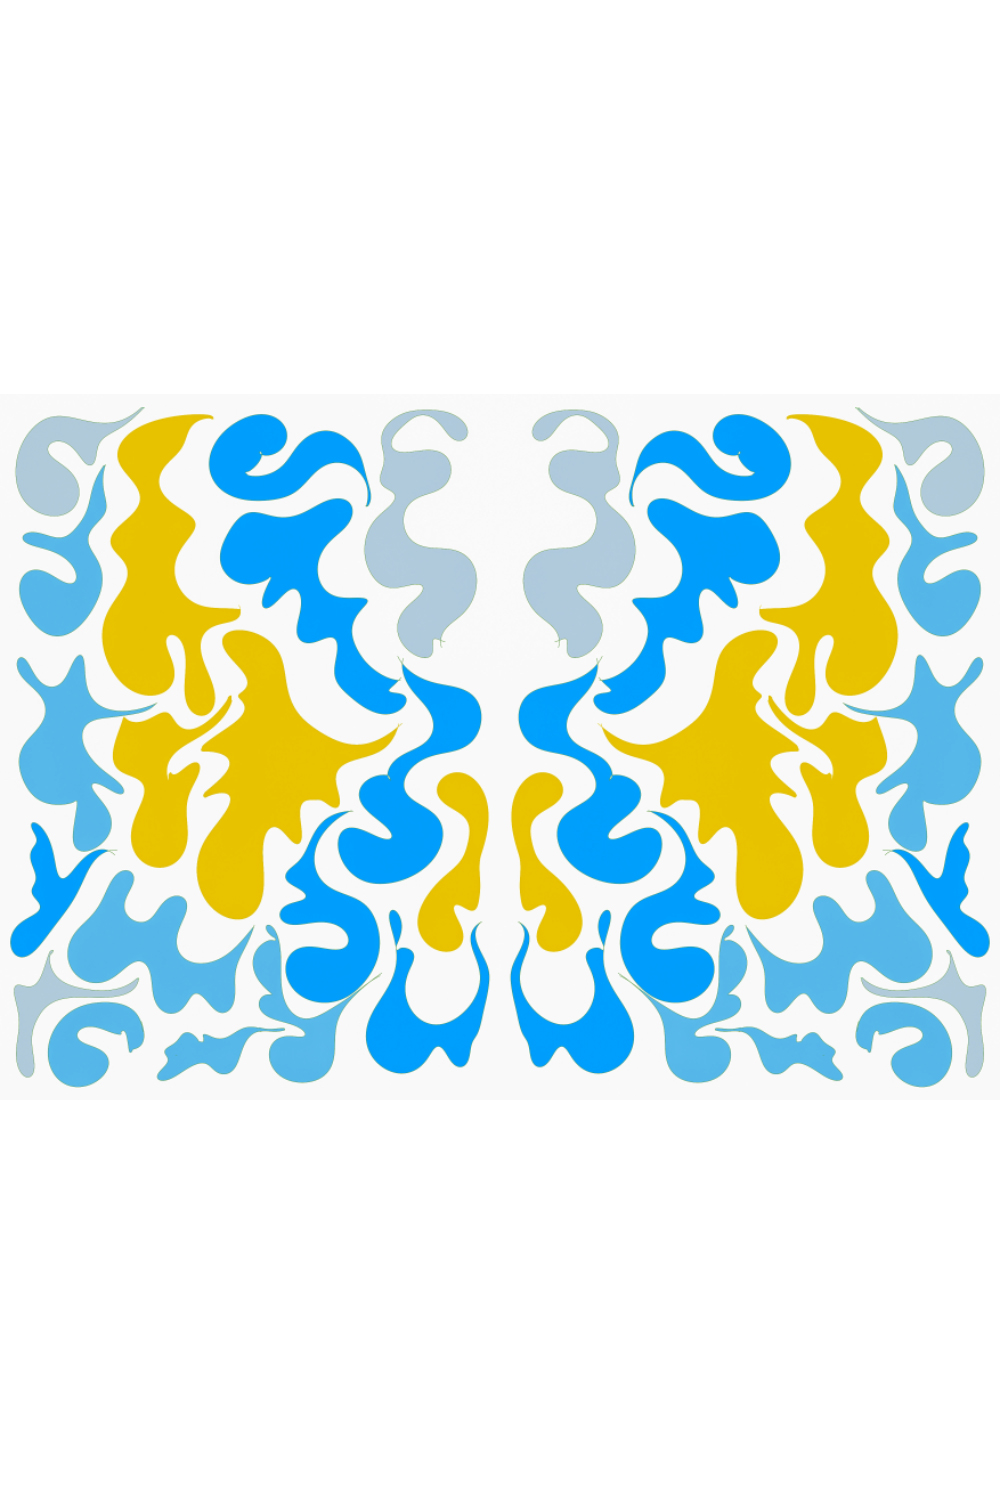 Abstraction in Ukrainians colors pinterest preview image.